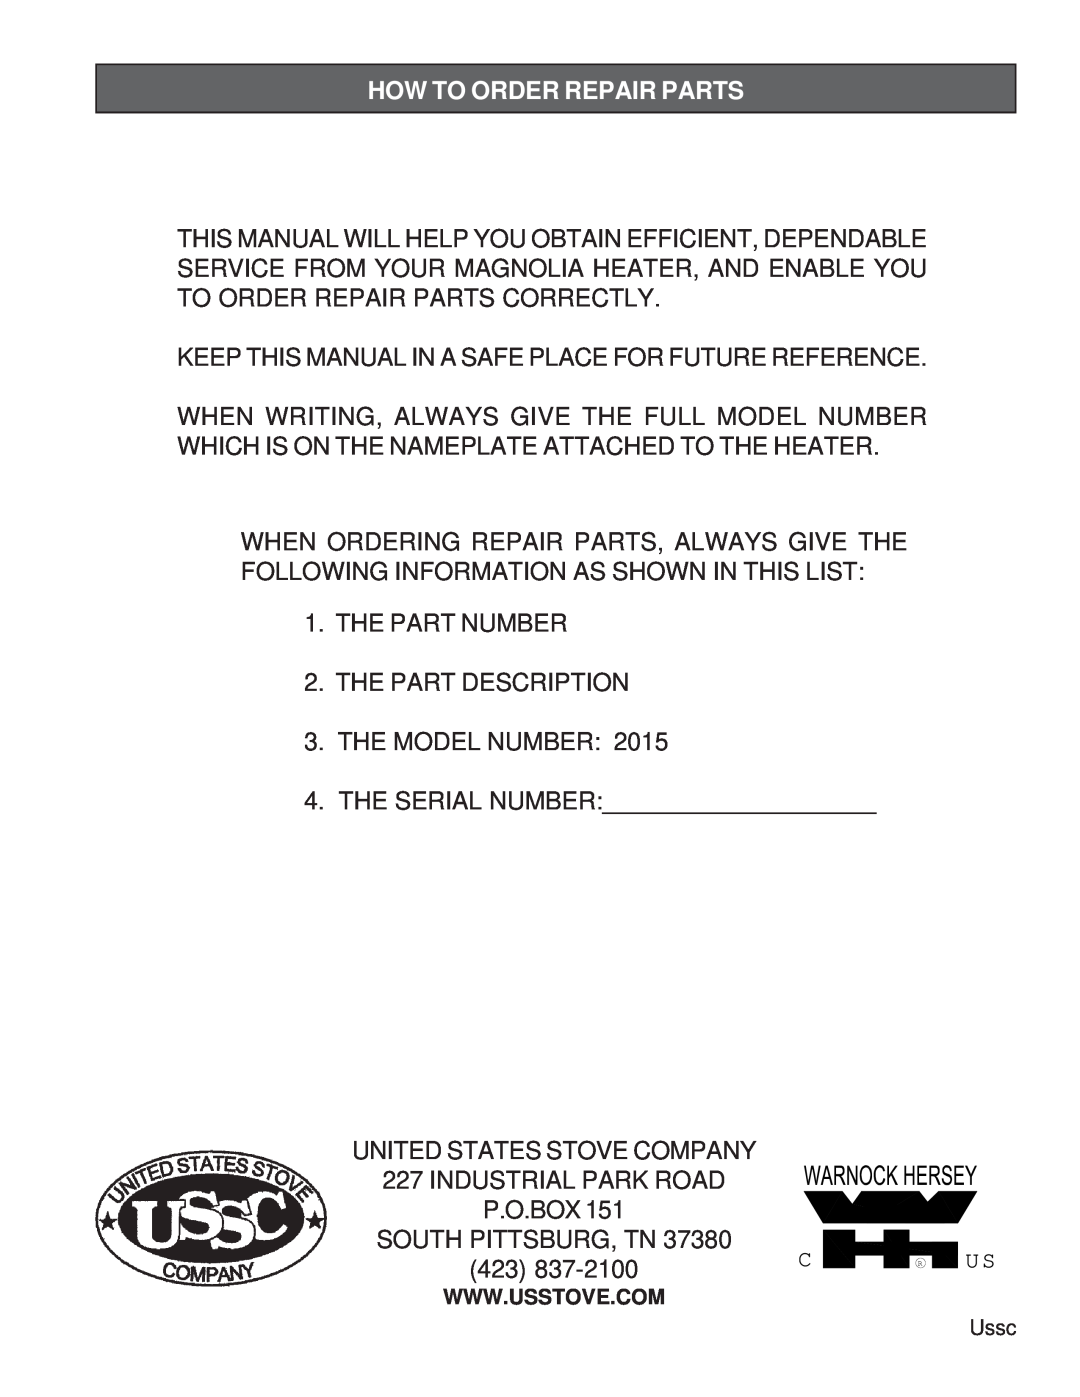 United States Stove 2015 instruction manual How To Order Repair Parts 